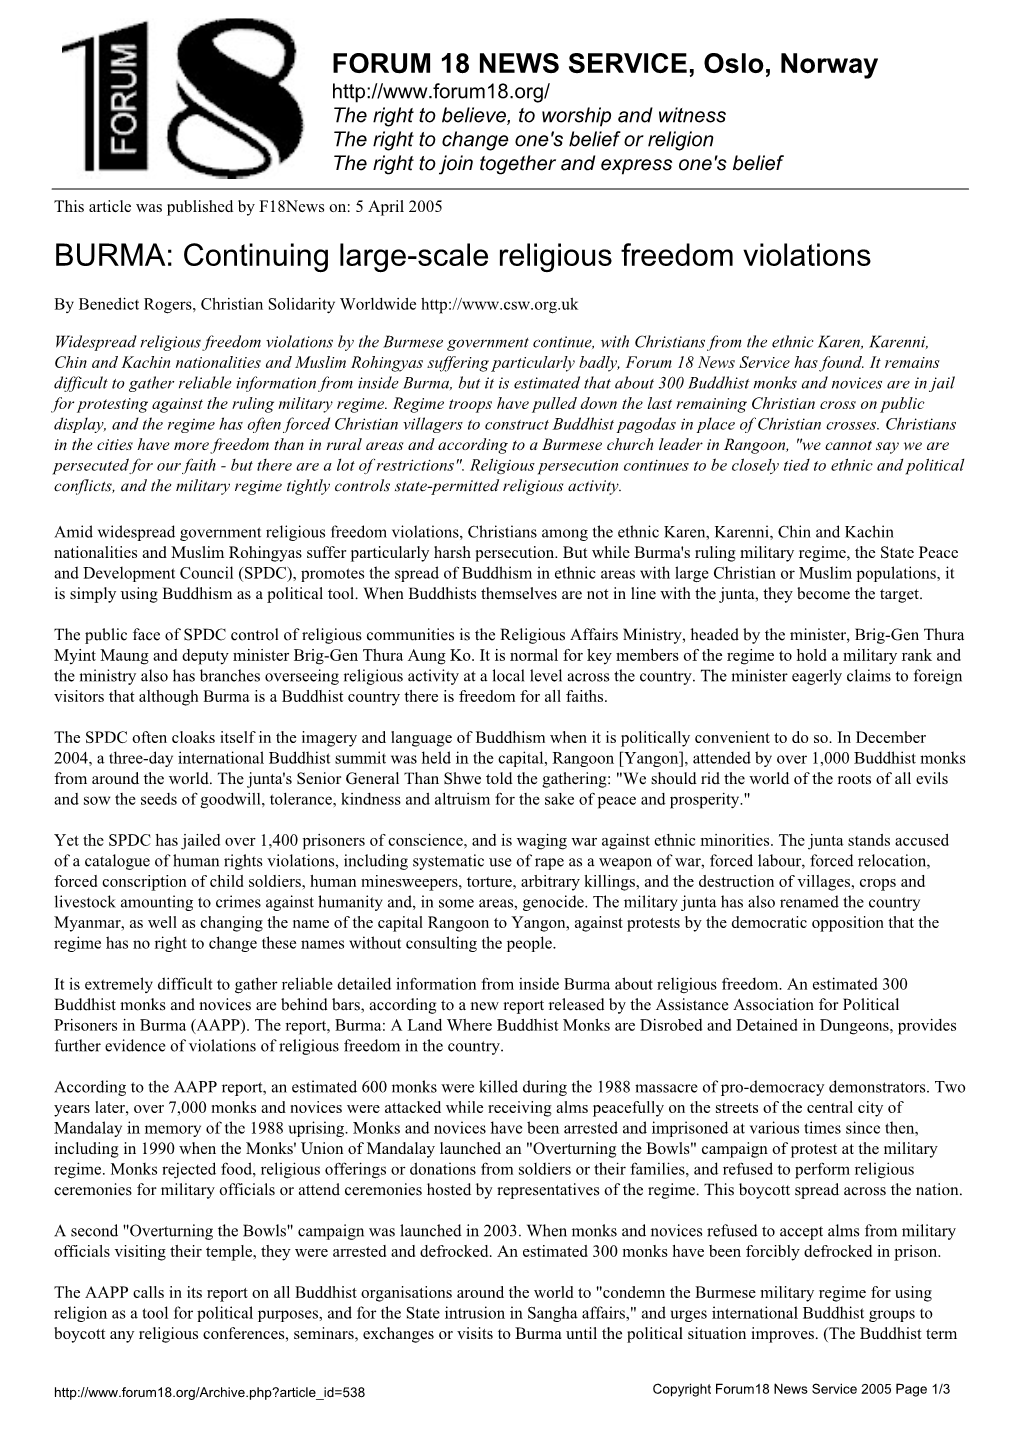 BURMA: Continuing Large-Scale Religious Freedom Violations